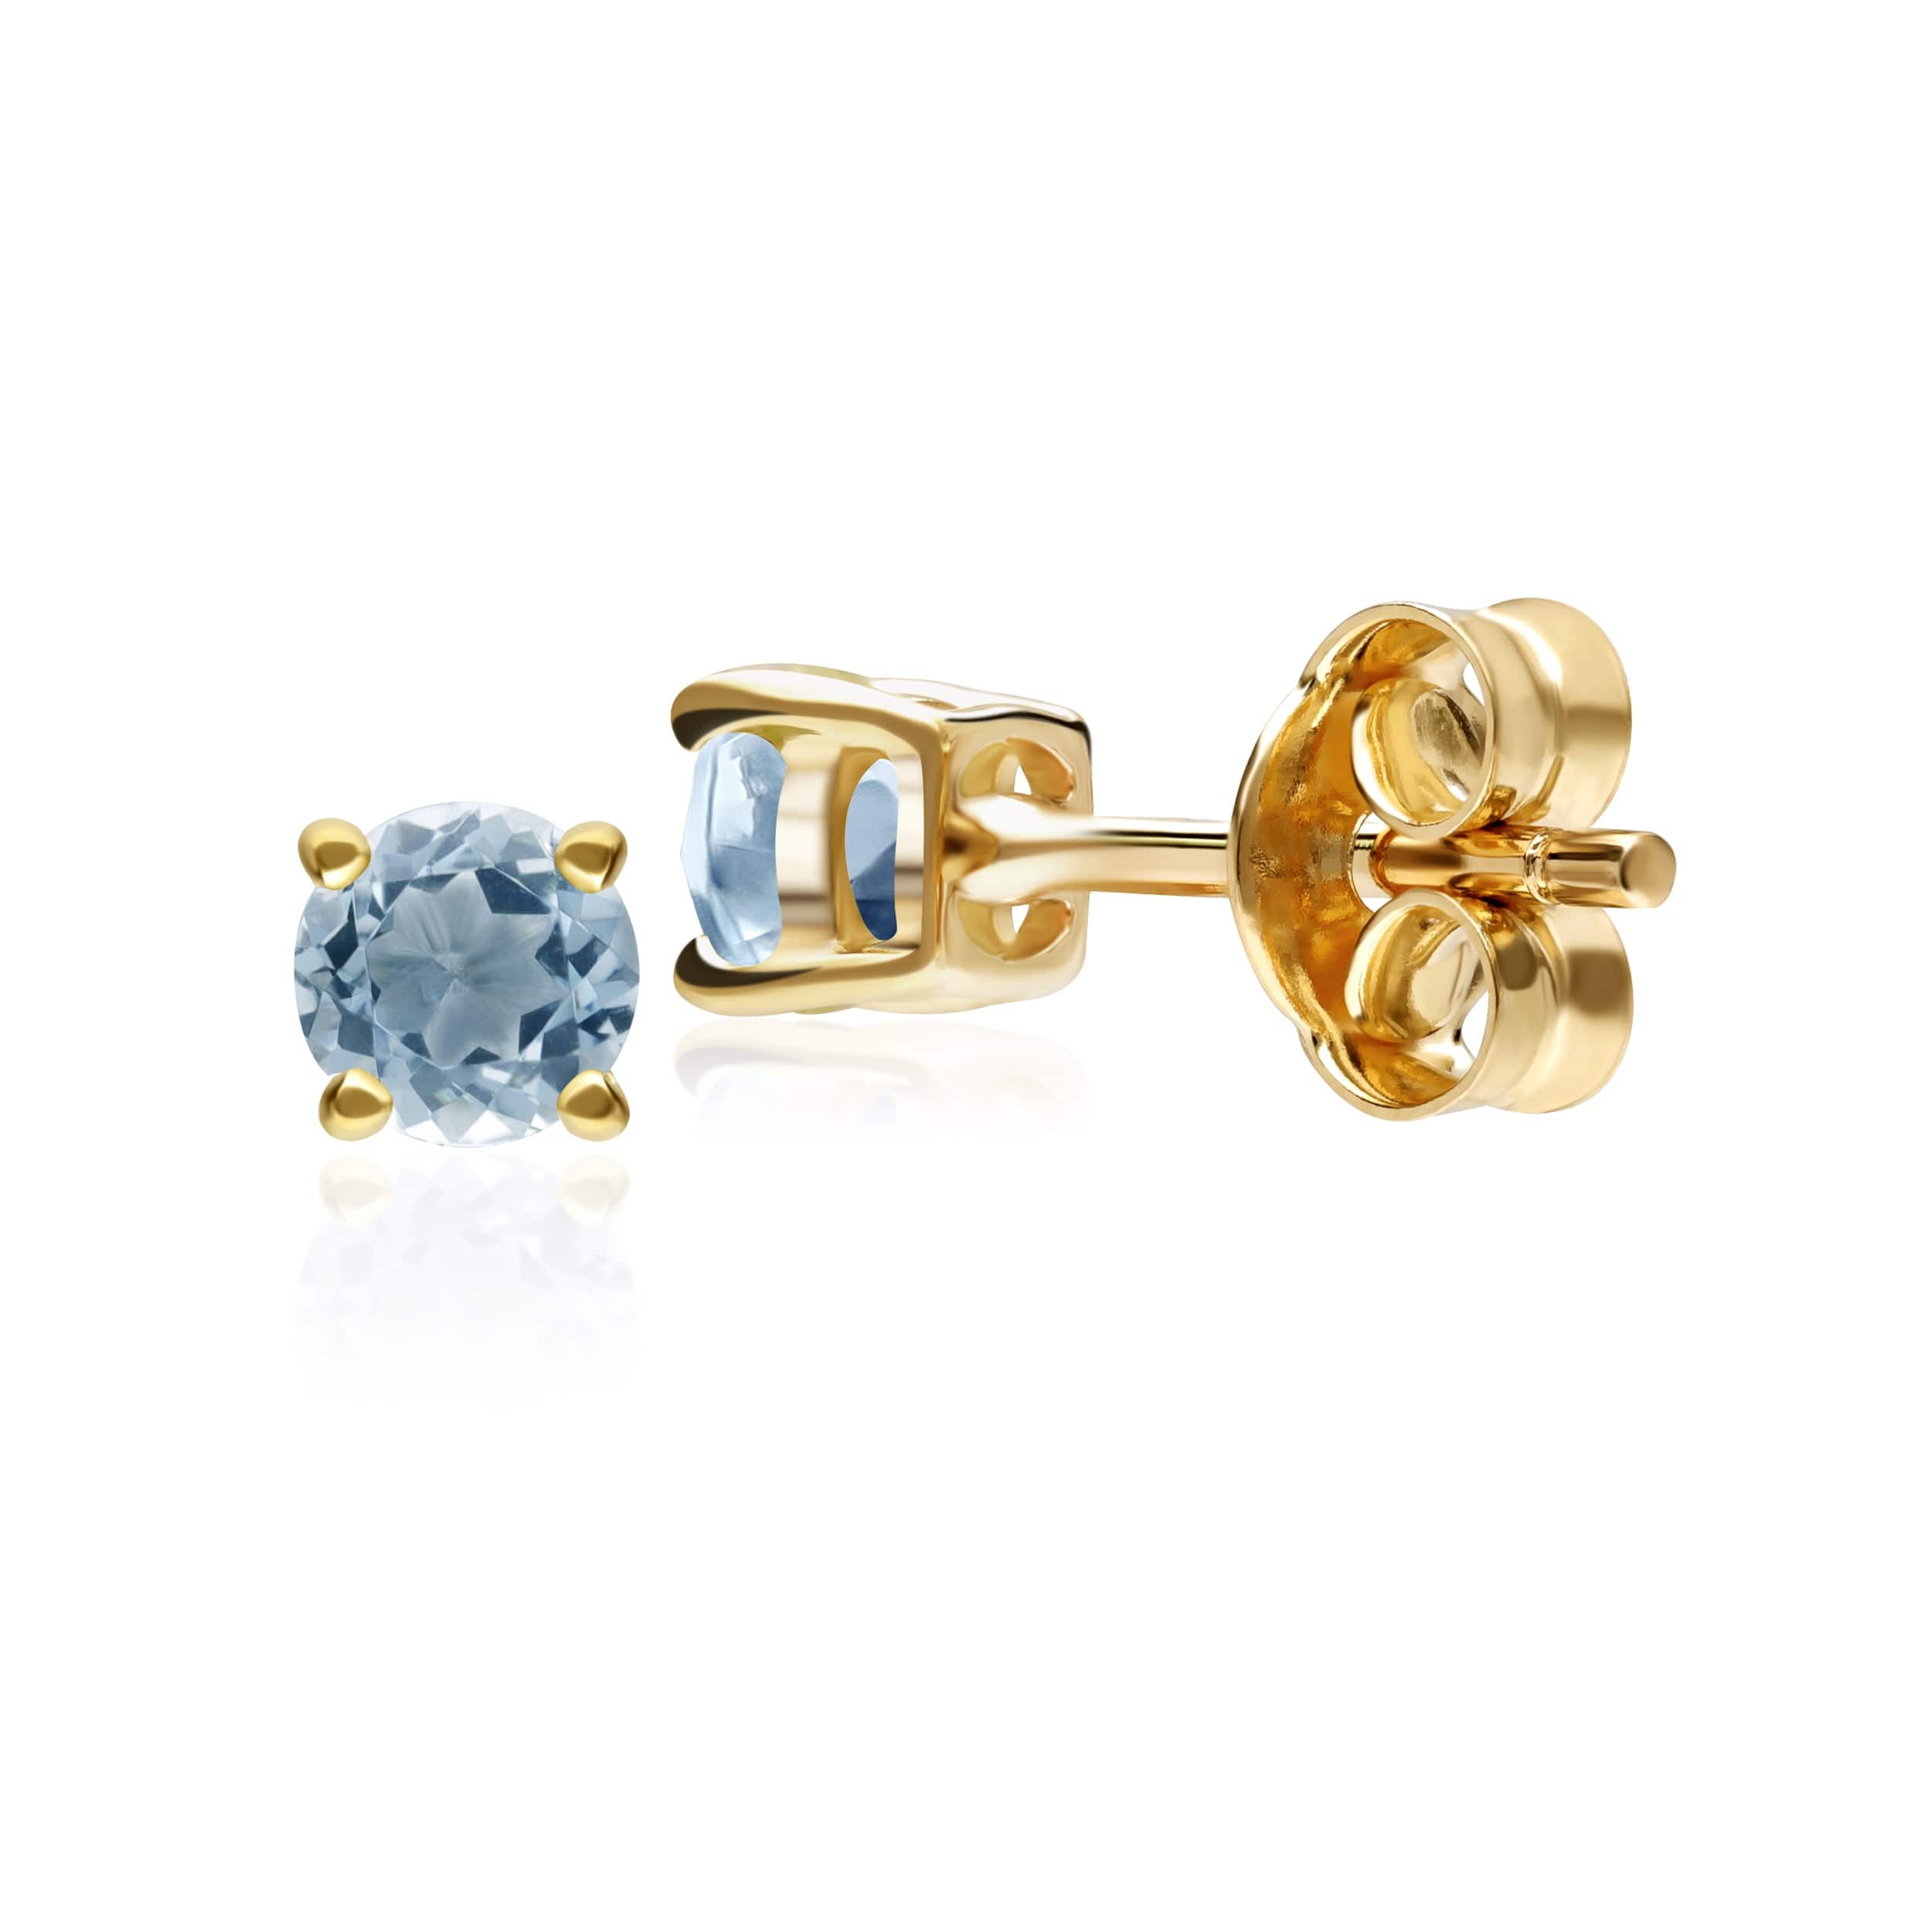 11567 Classic Round Aquamarine Stud Earrings in 9ct Yellow Gold 3.5mm 3